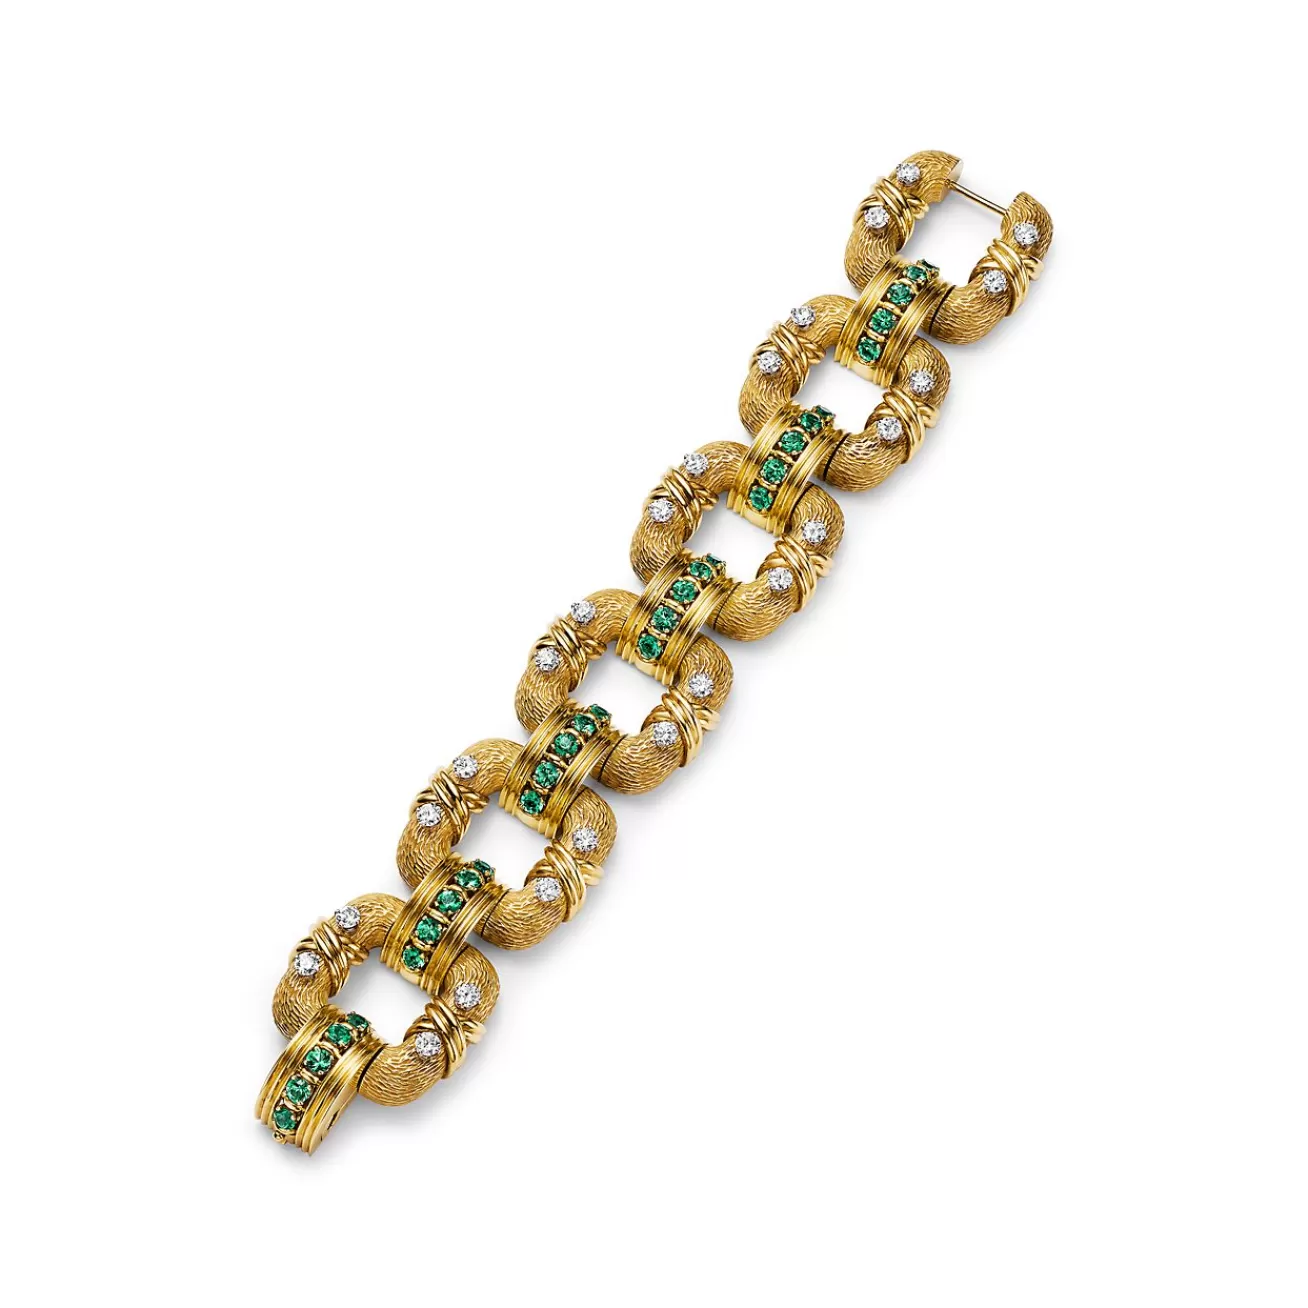 Tiffany & Co. Bracelet in Yellow Gold and Platinum with Emeralds and Diamonds | ^ Bracelets | Gold Jewelry